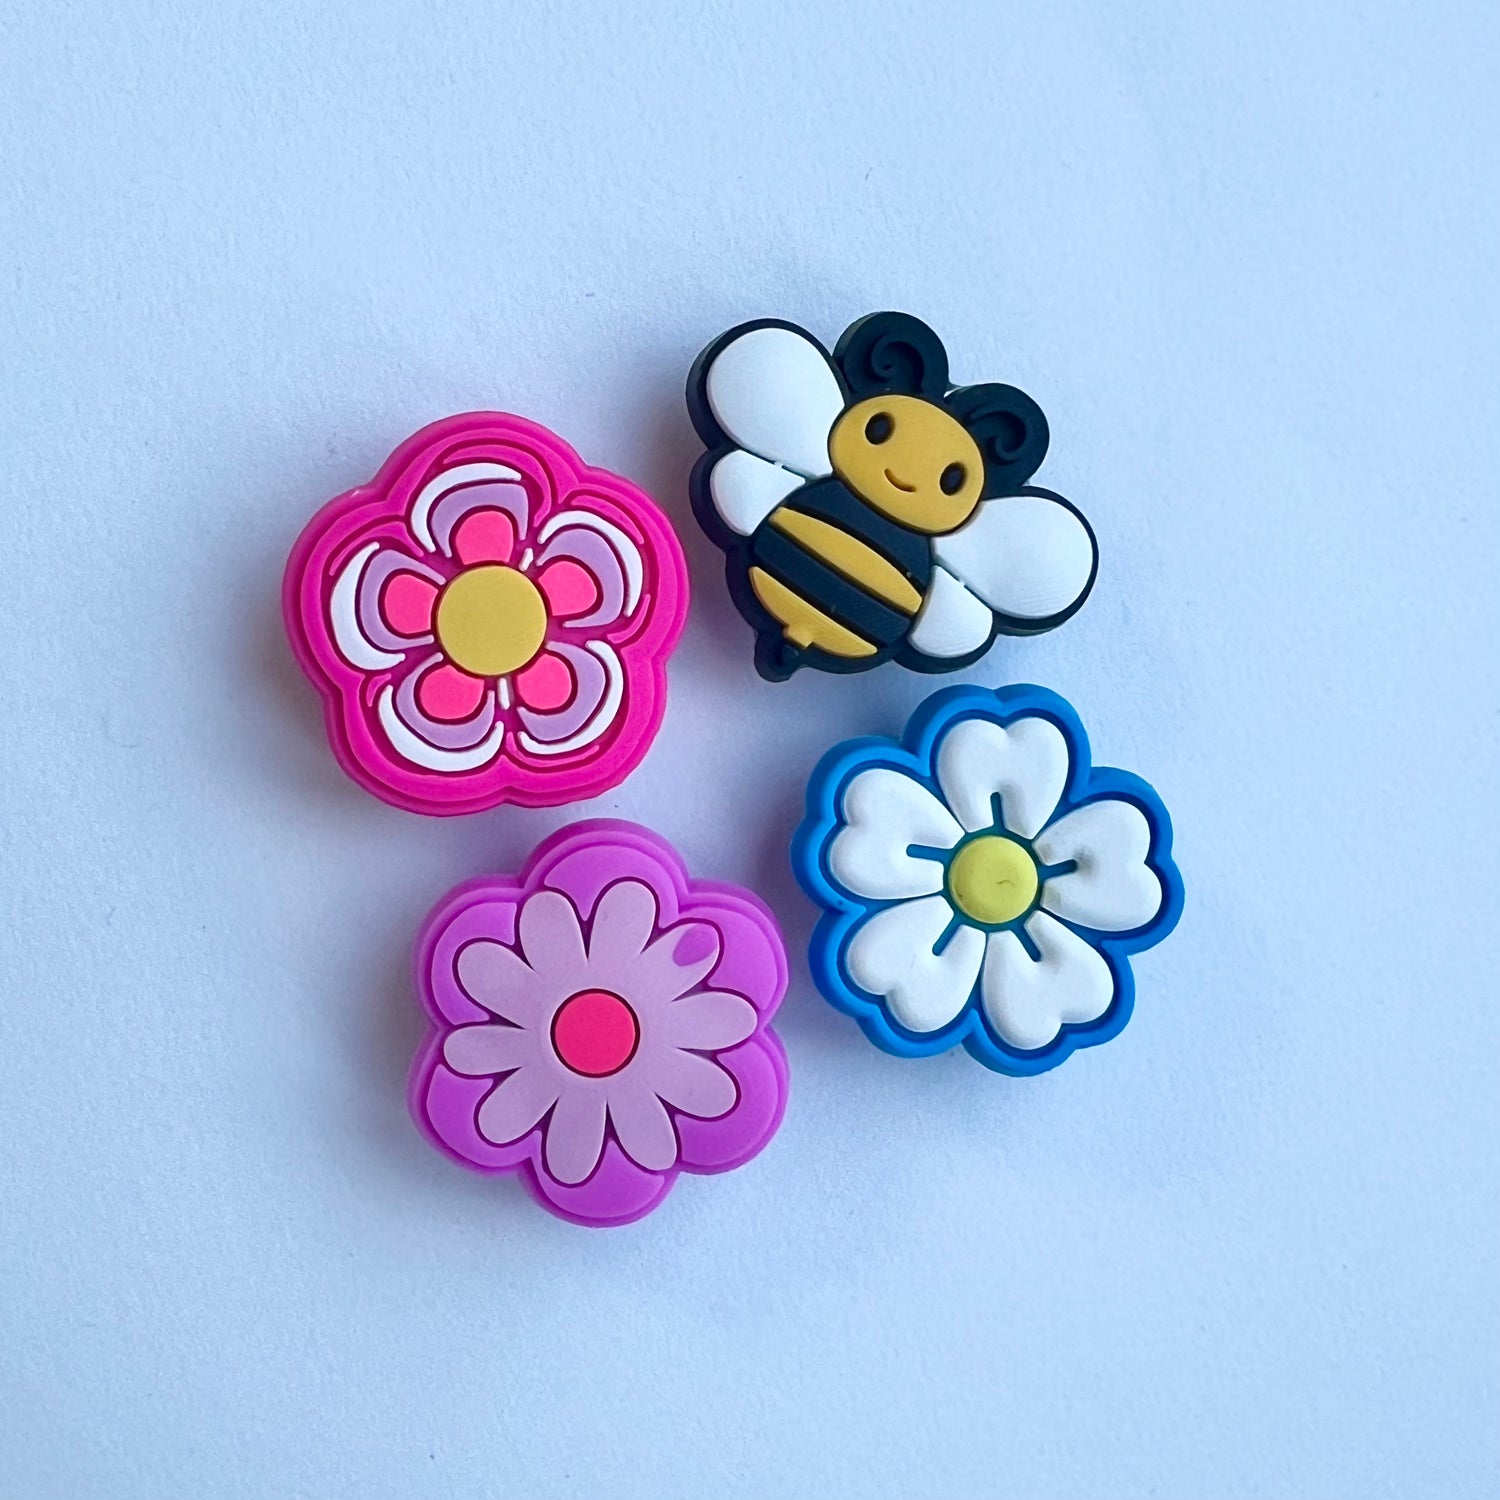 The Bumblebee Charms Pack